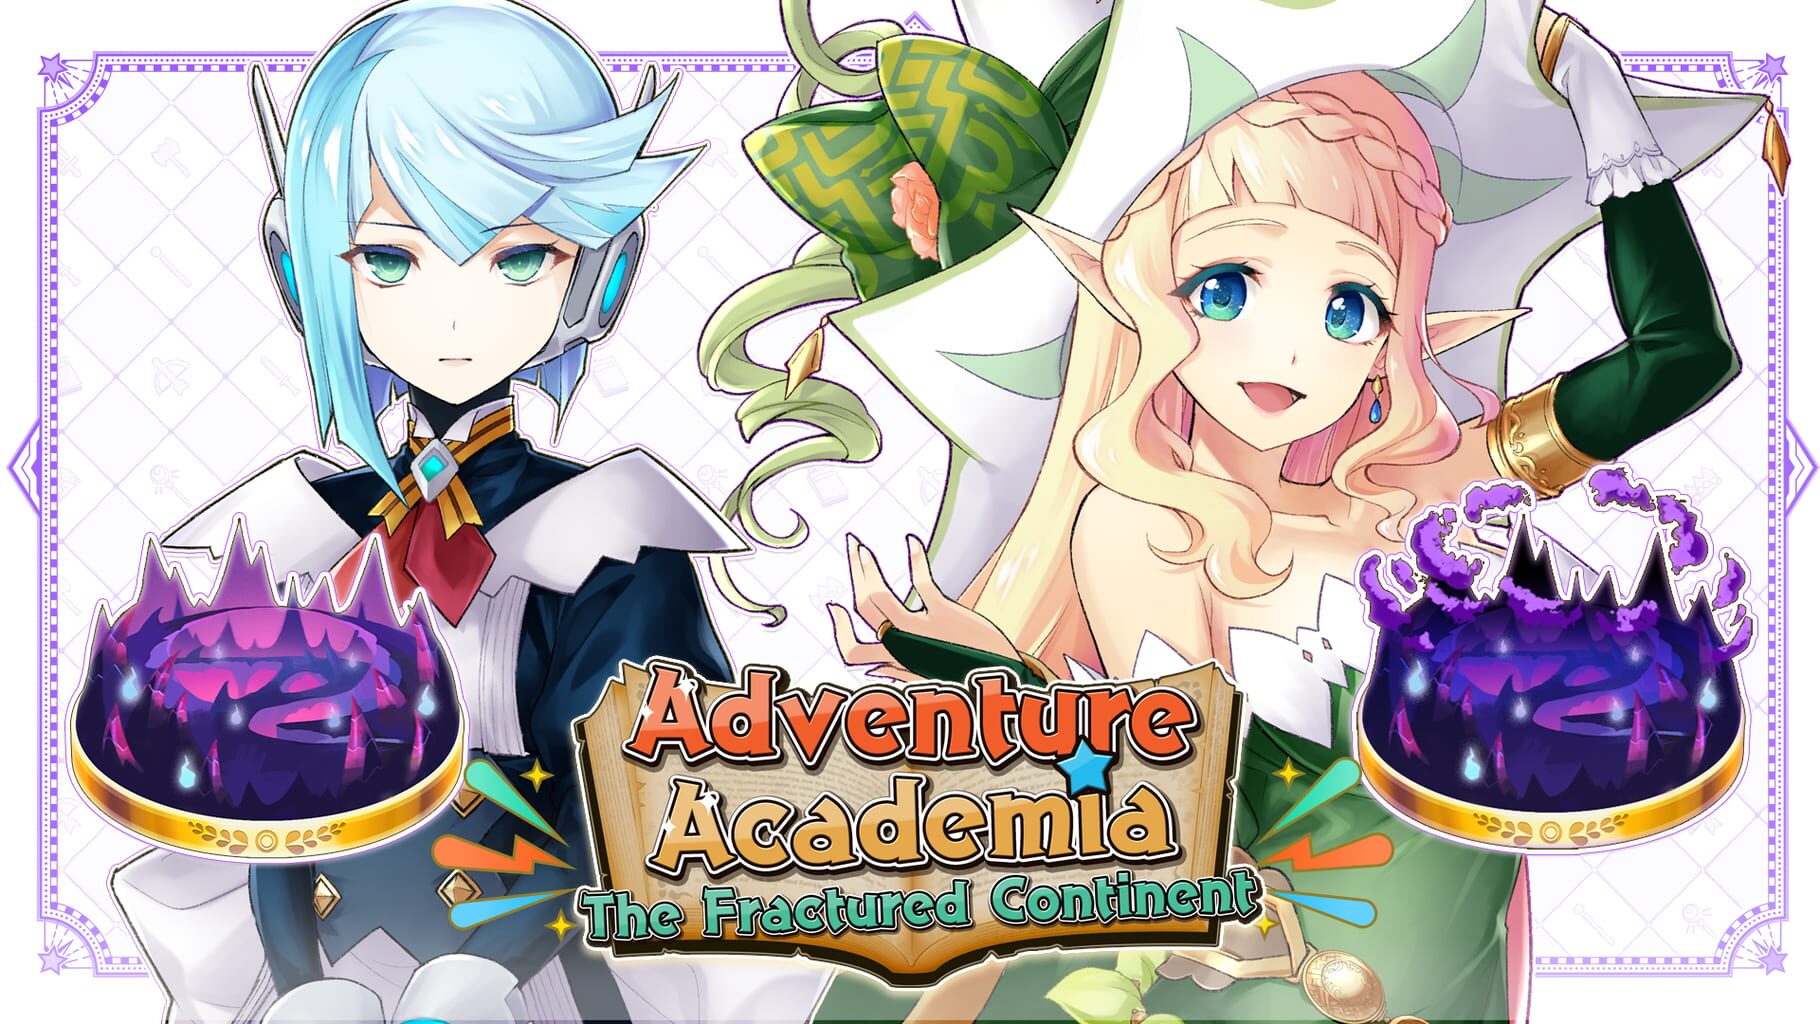 Adventure Academia: The Fractured Continent - Additional Content Vol.3 Bundle artwork